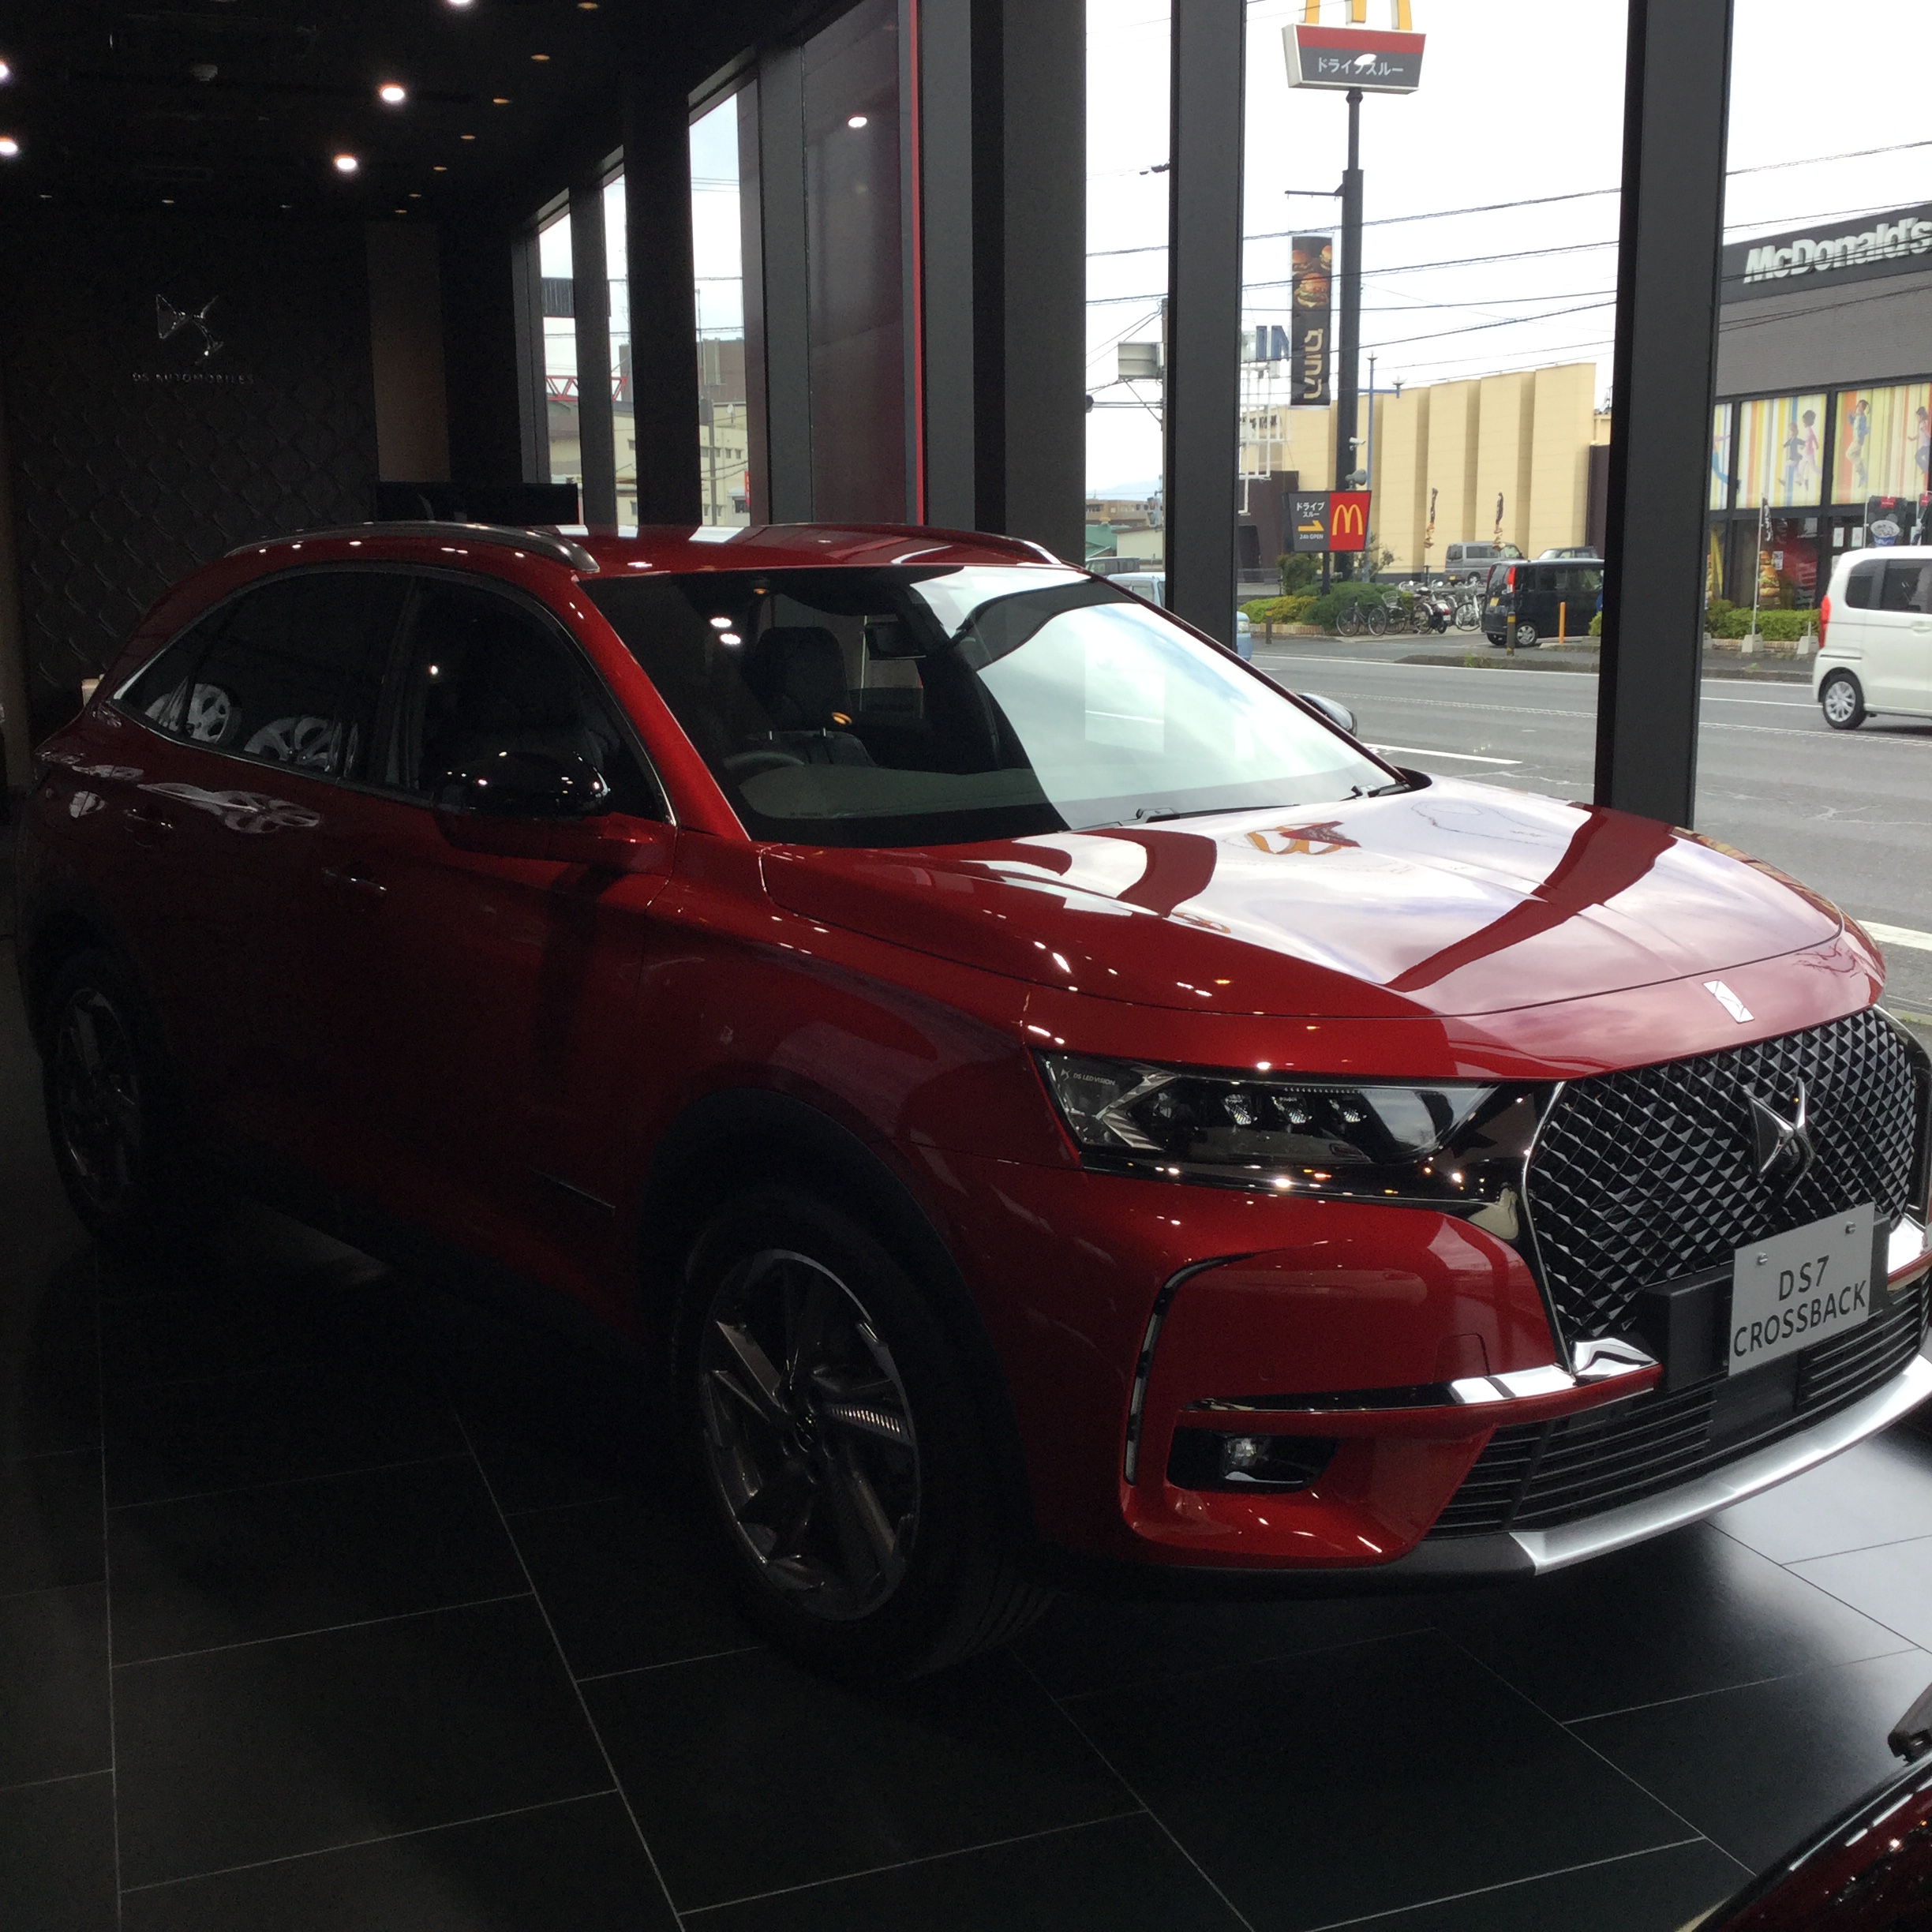 DS7CROSSBACK　　本日展示最終日！！！